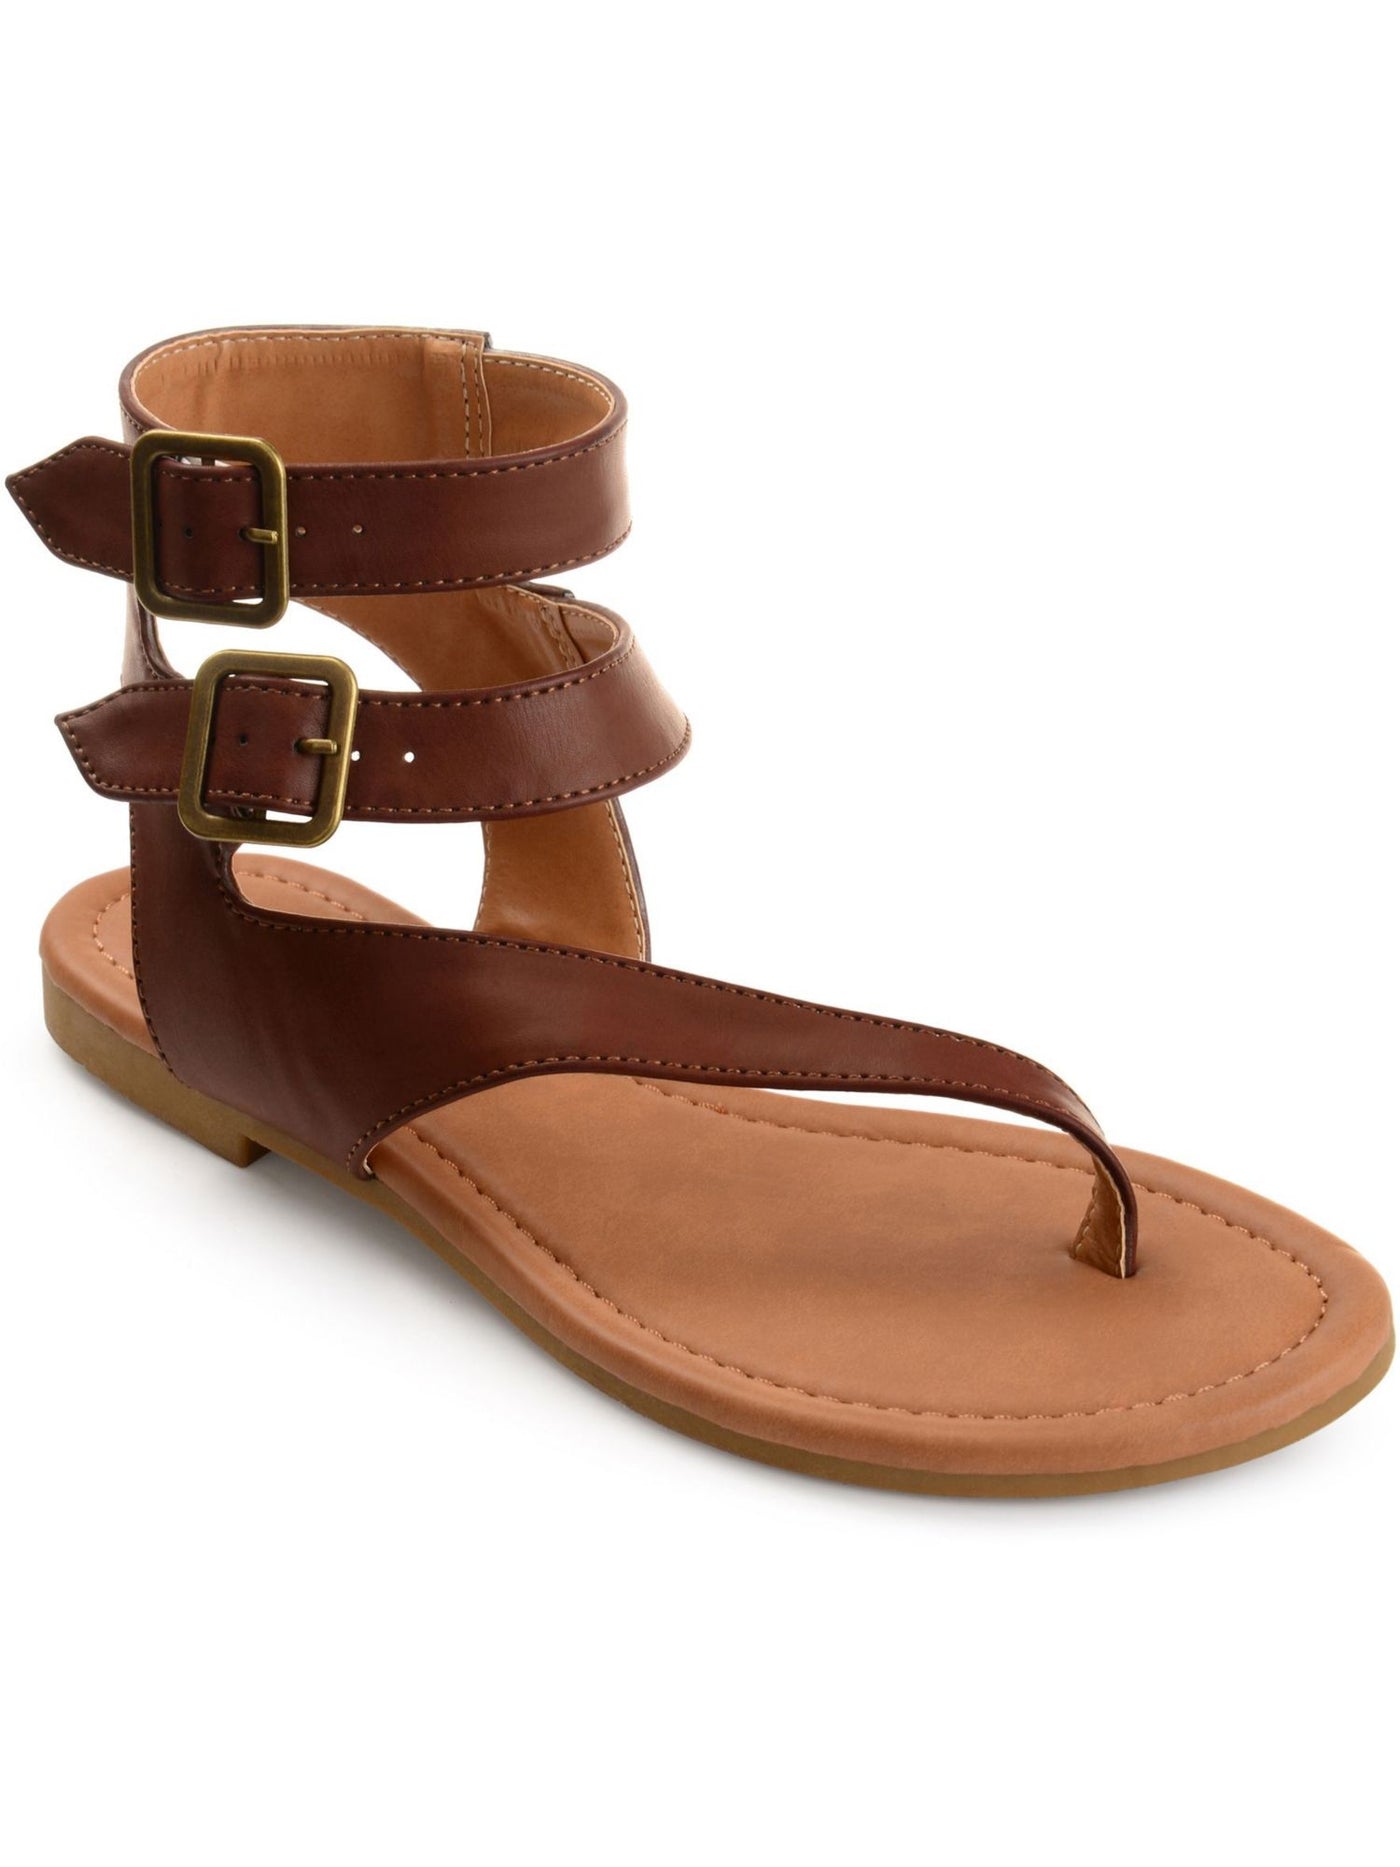 JOURNEE COLLECTION Womens Brown Padded Ankle Strap Asymmetrical Kyle Round Toe Buckle Thong Sandals Shoes 7.5